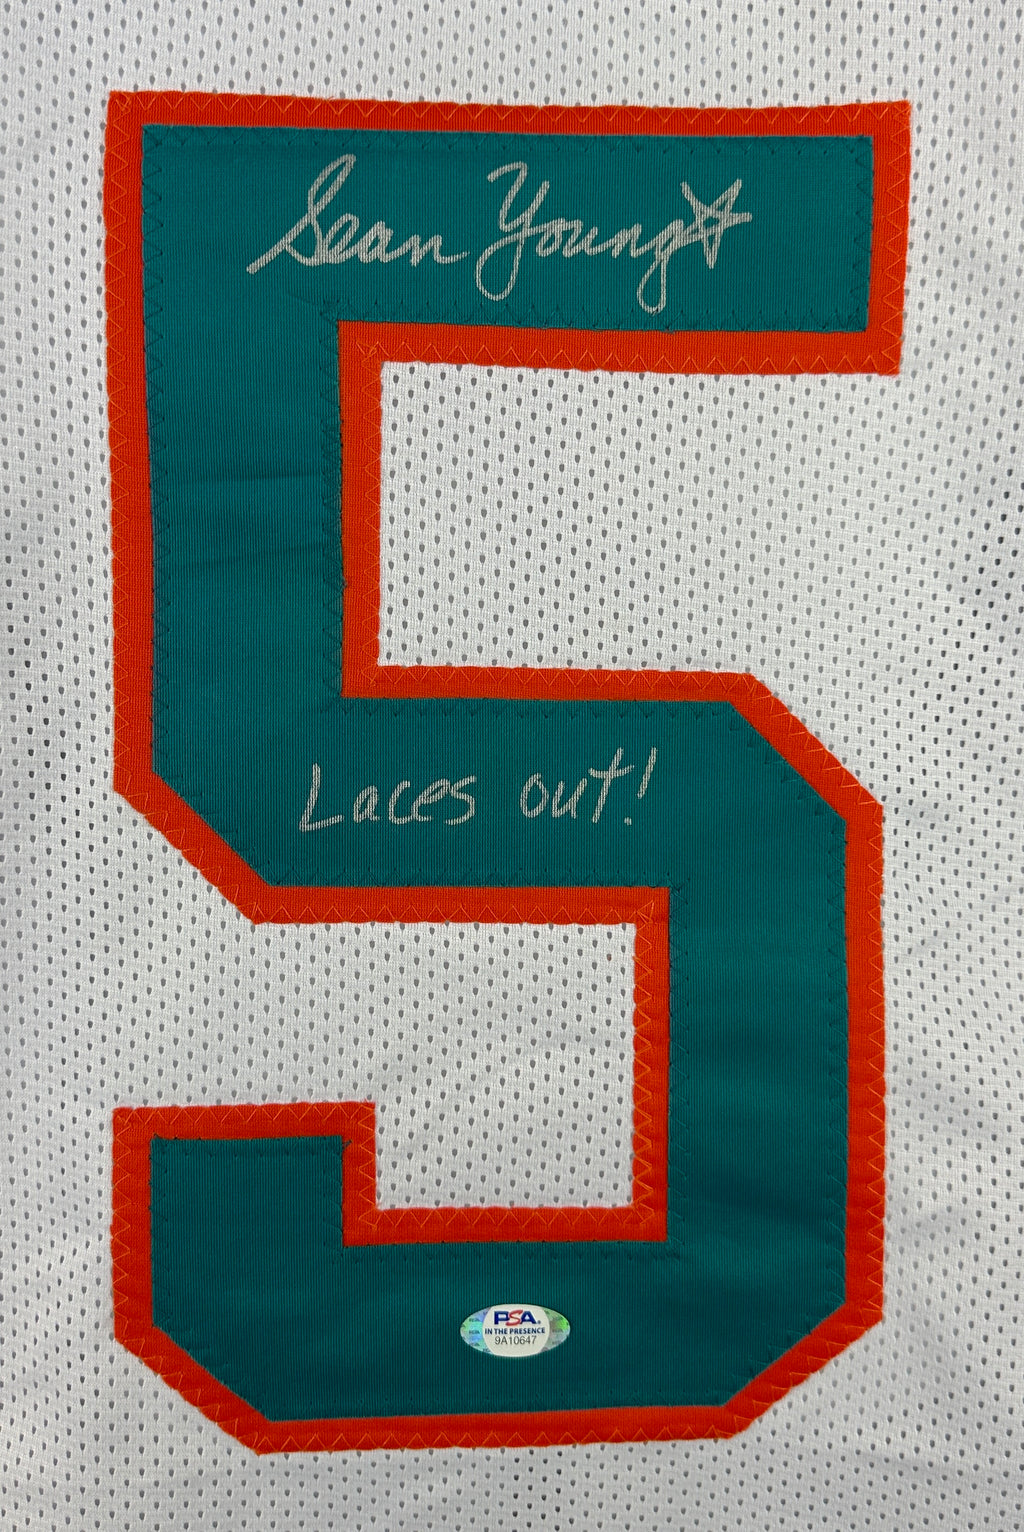 Sean Young signed inscribed jersey Miami Dolphins PSA Ray Finkle Ace Ventura